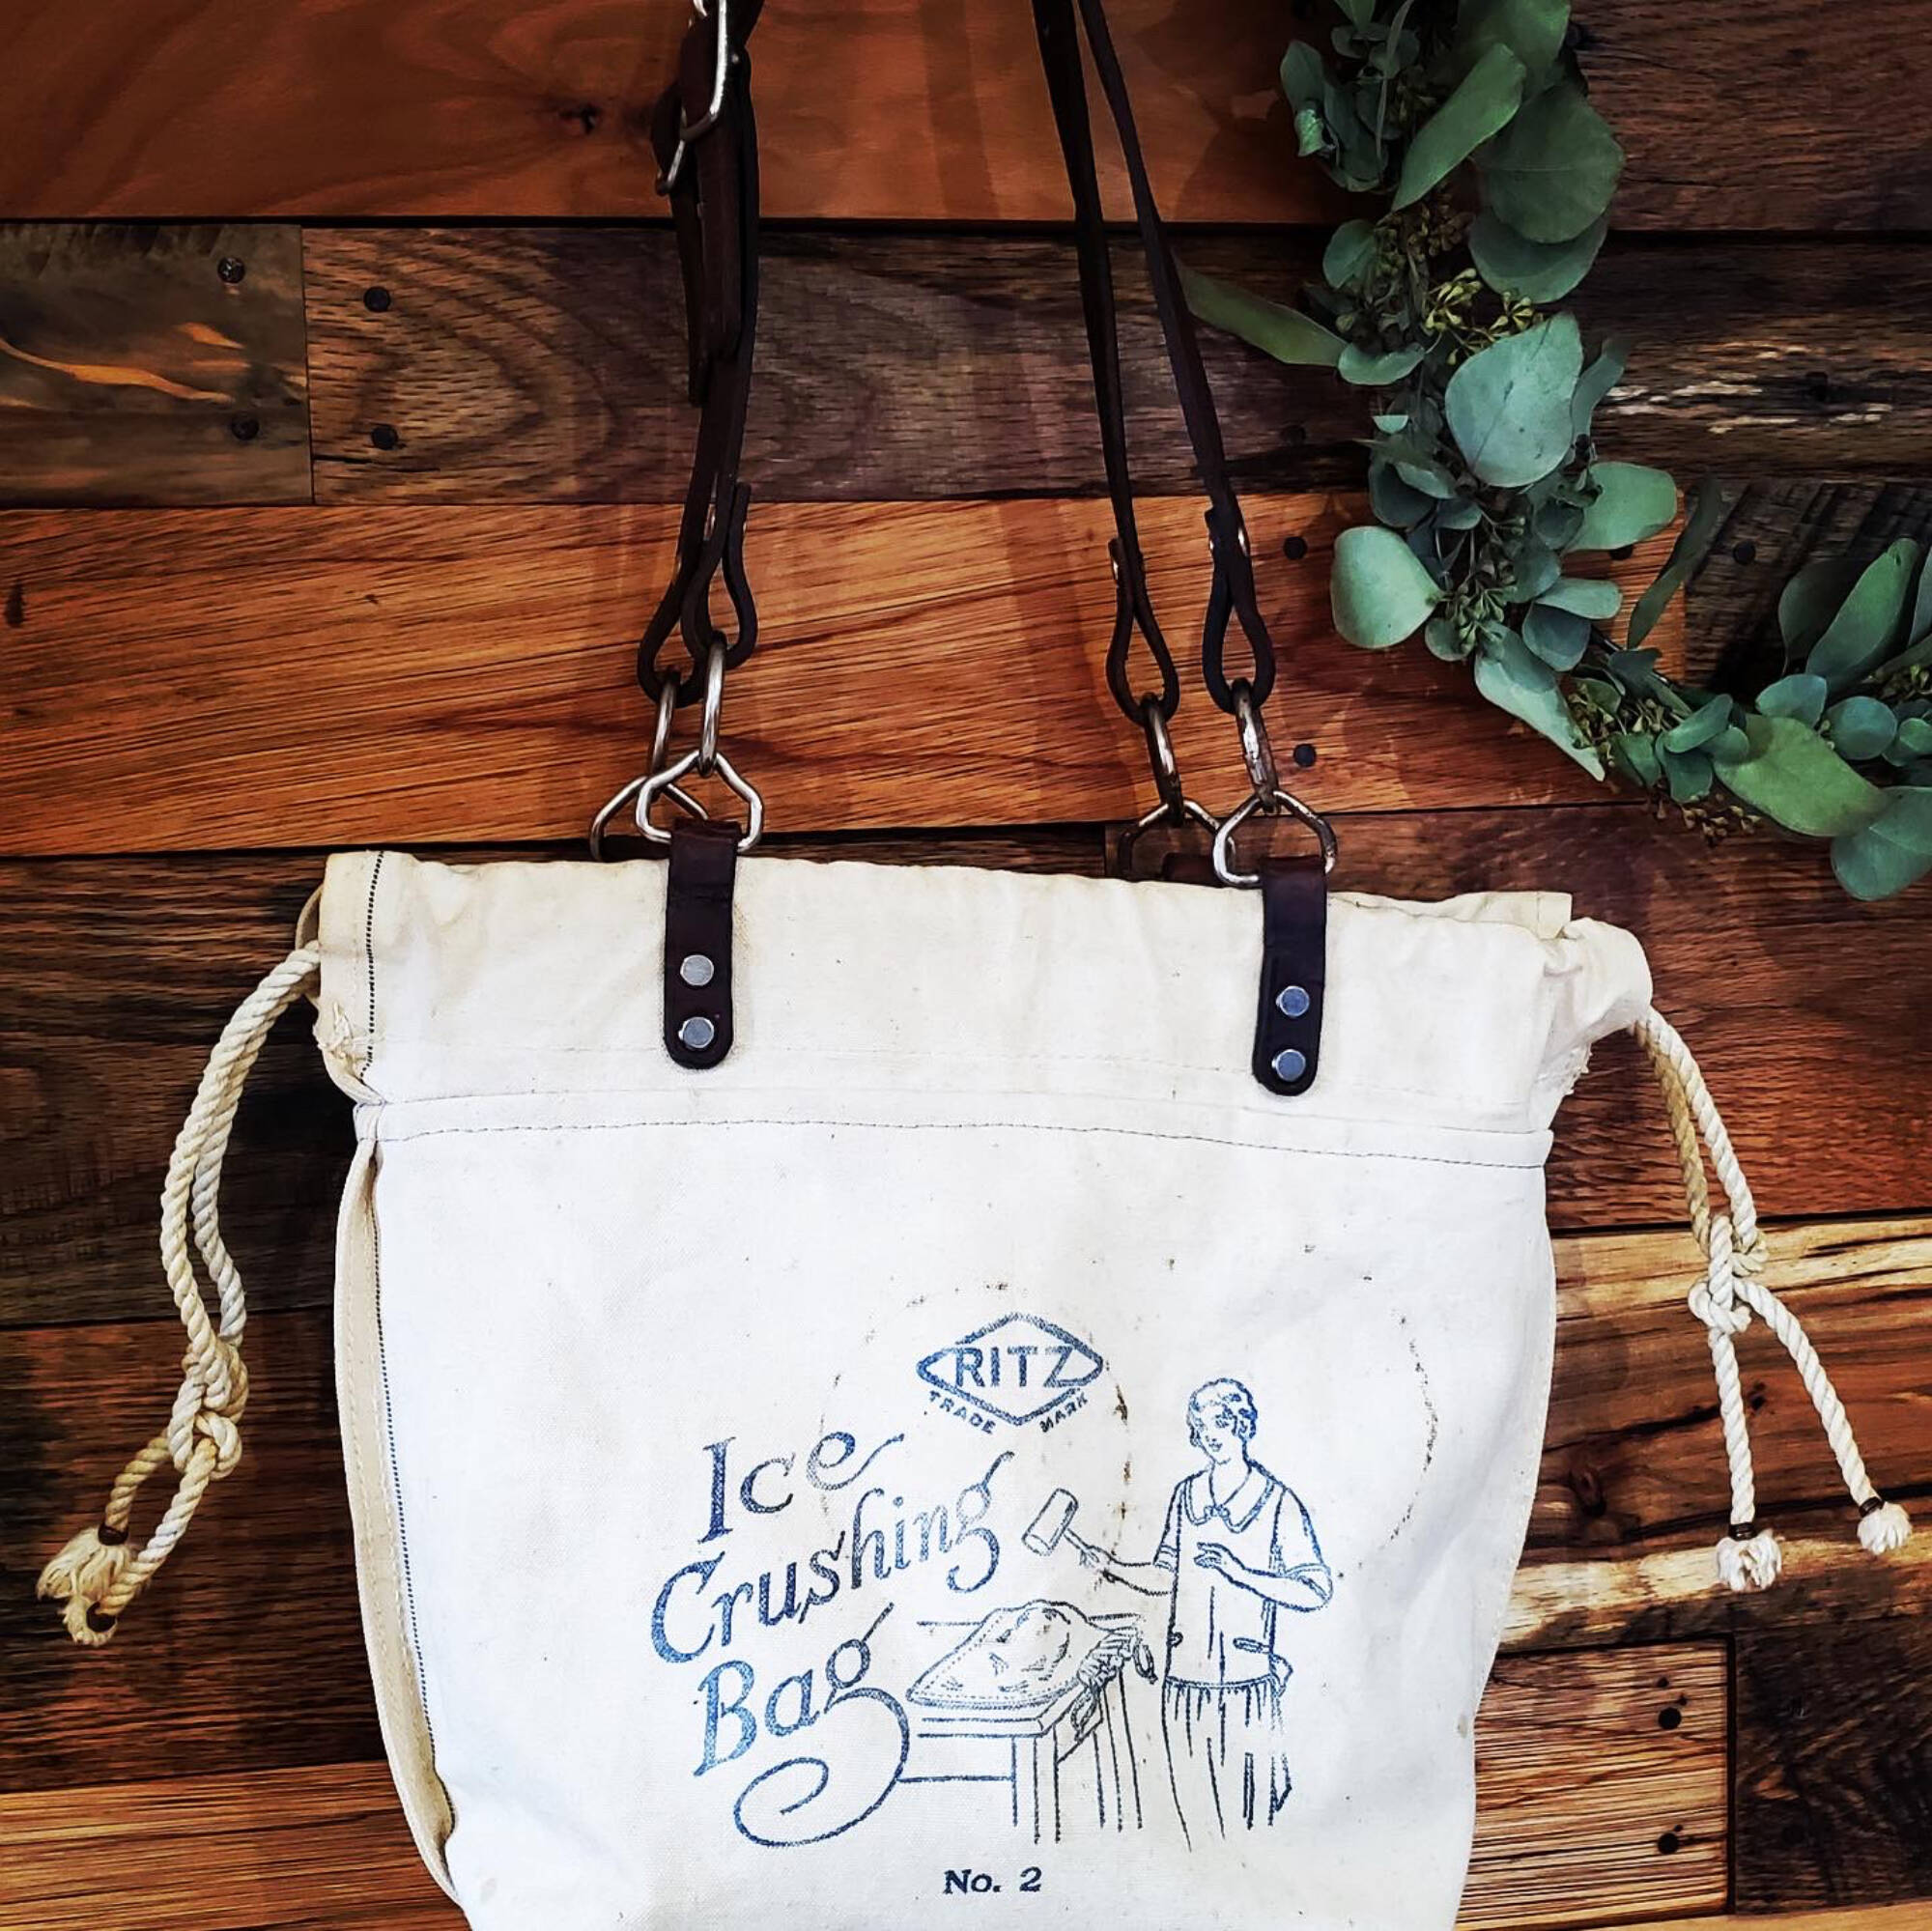 Photo courtesy of Inspired Country Store
Find purses, tote bags, zipper pouches and more Inspired Country Store’s booth at the Sequim Farmers & Artisans Market.